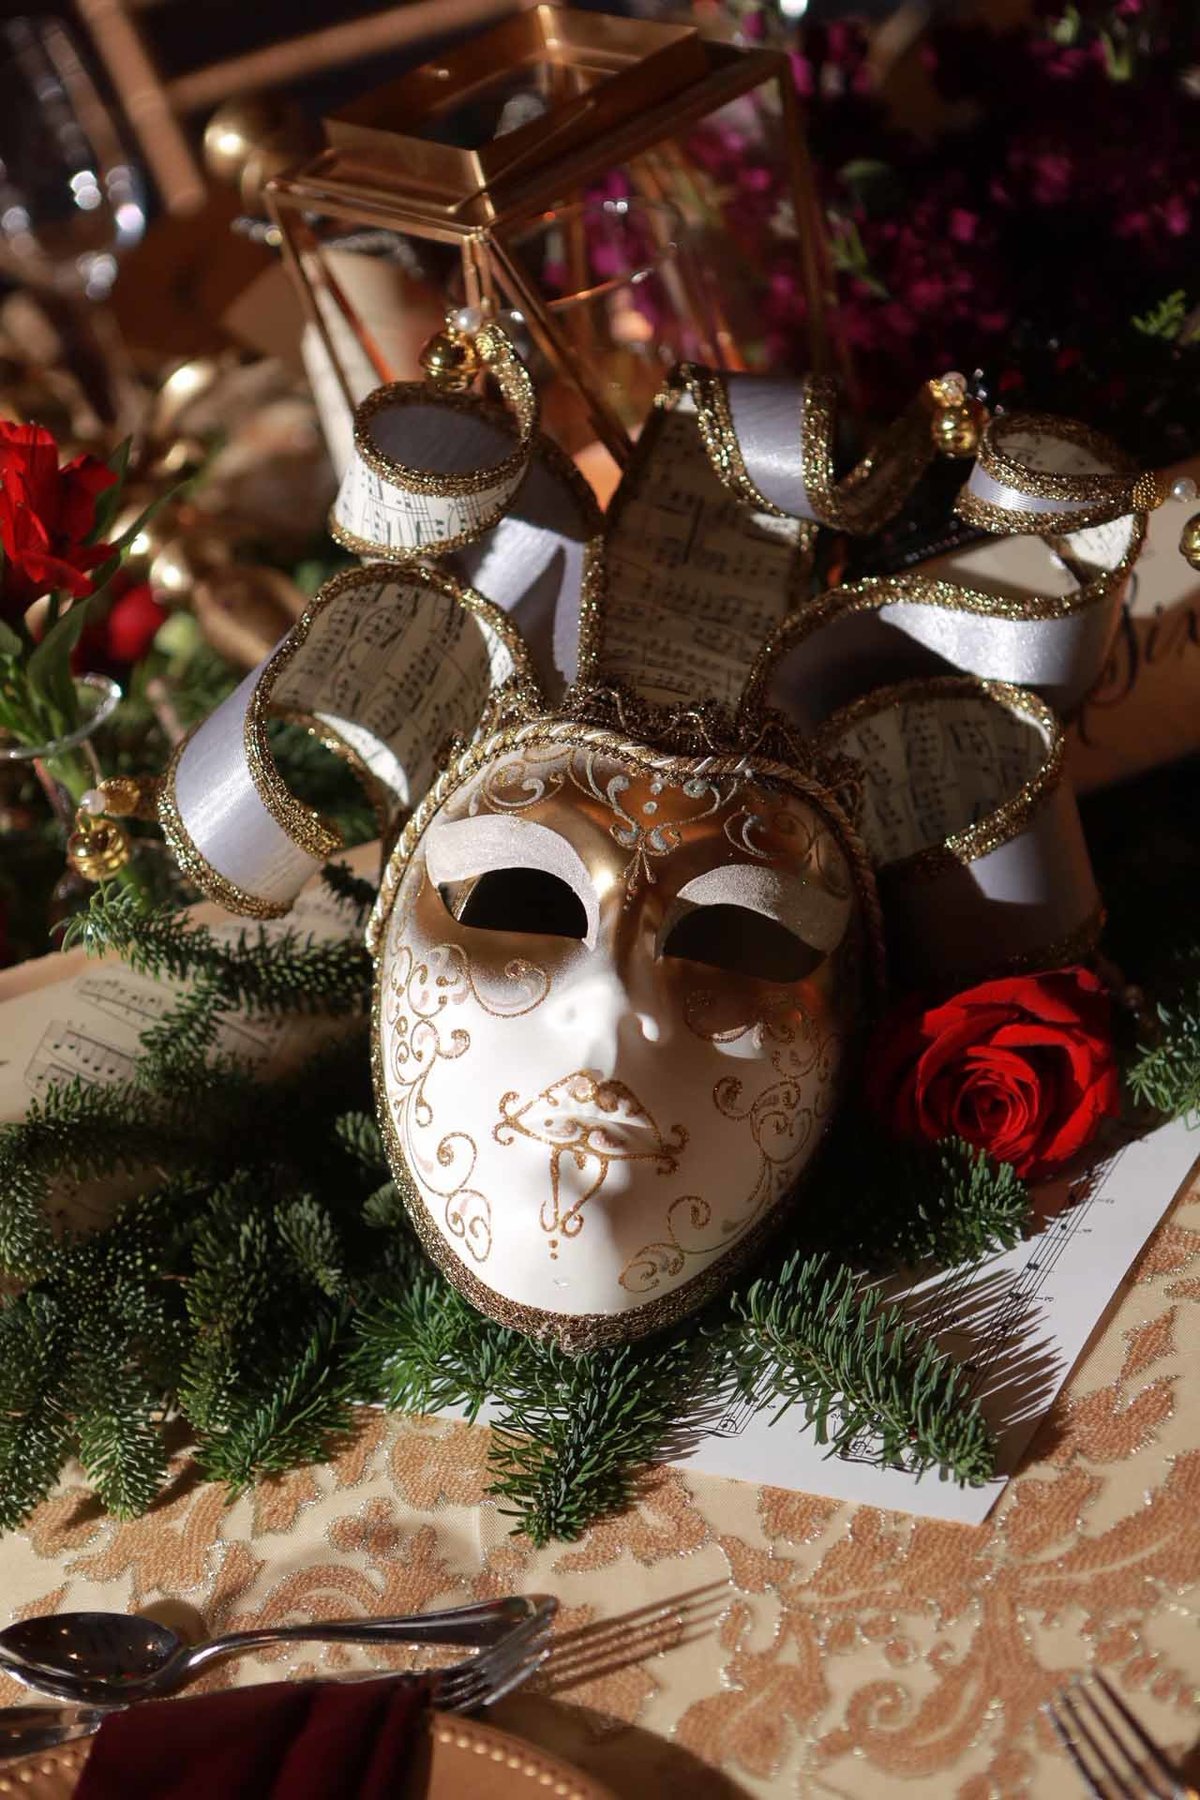 vintage carnival mask on evergreen runner as holiday centerpiece